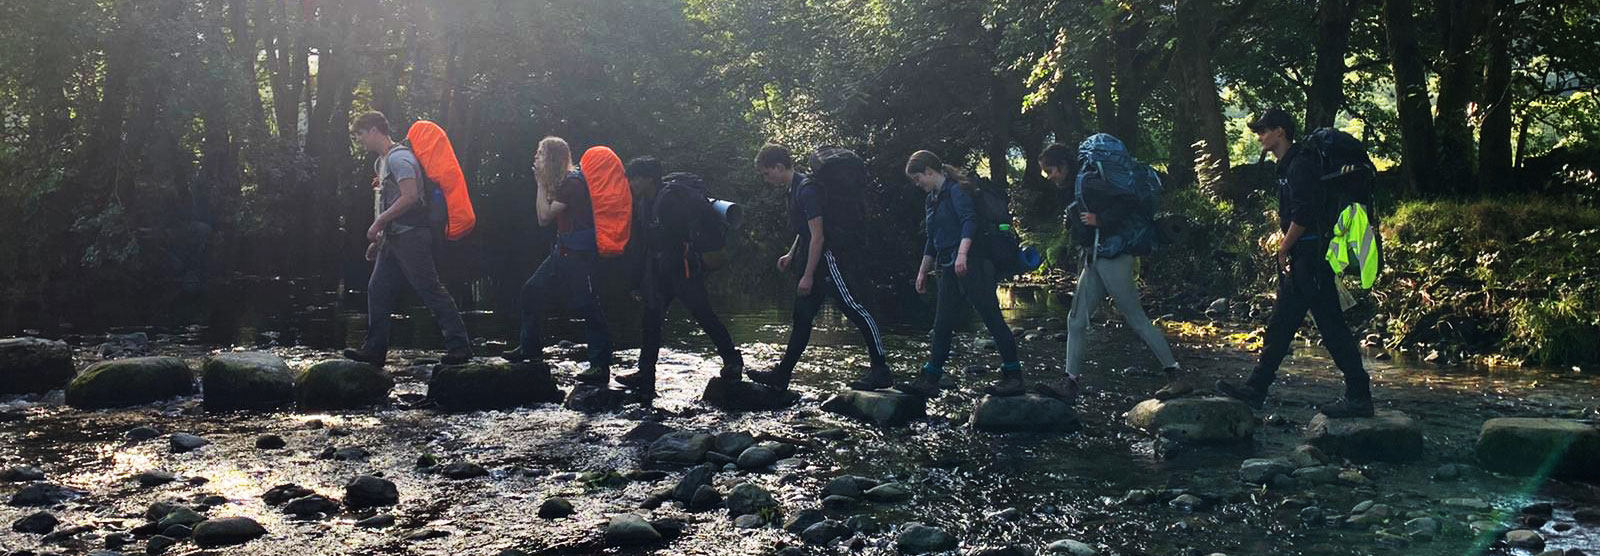 DofE group on stepping stones